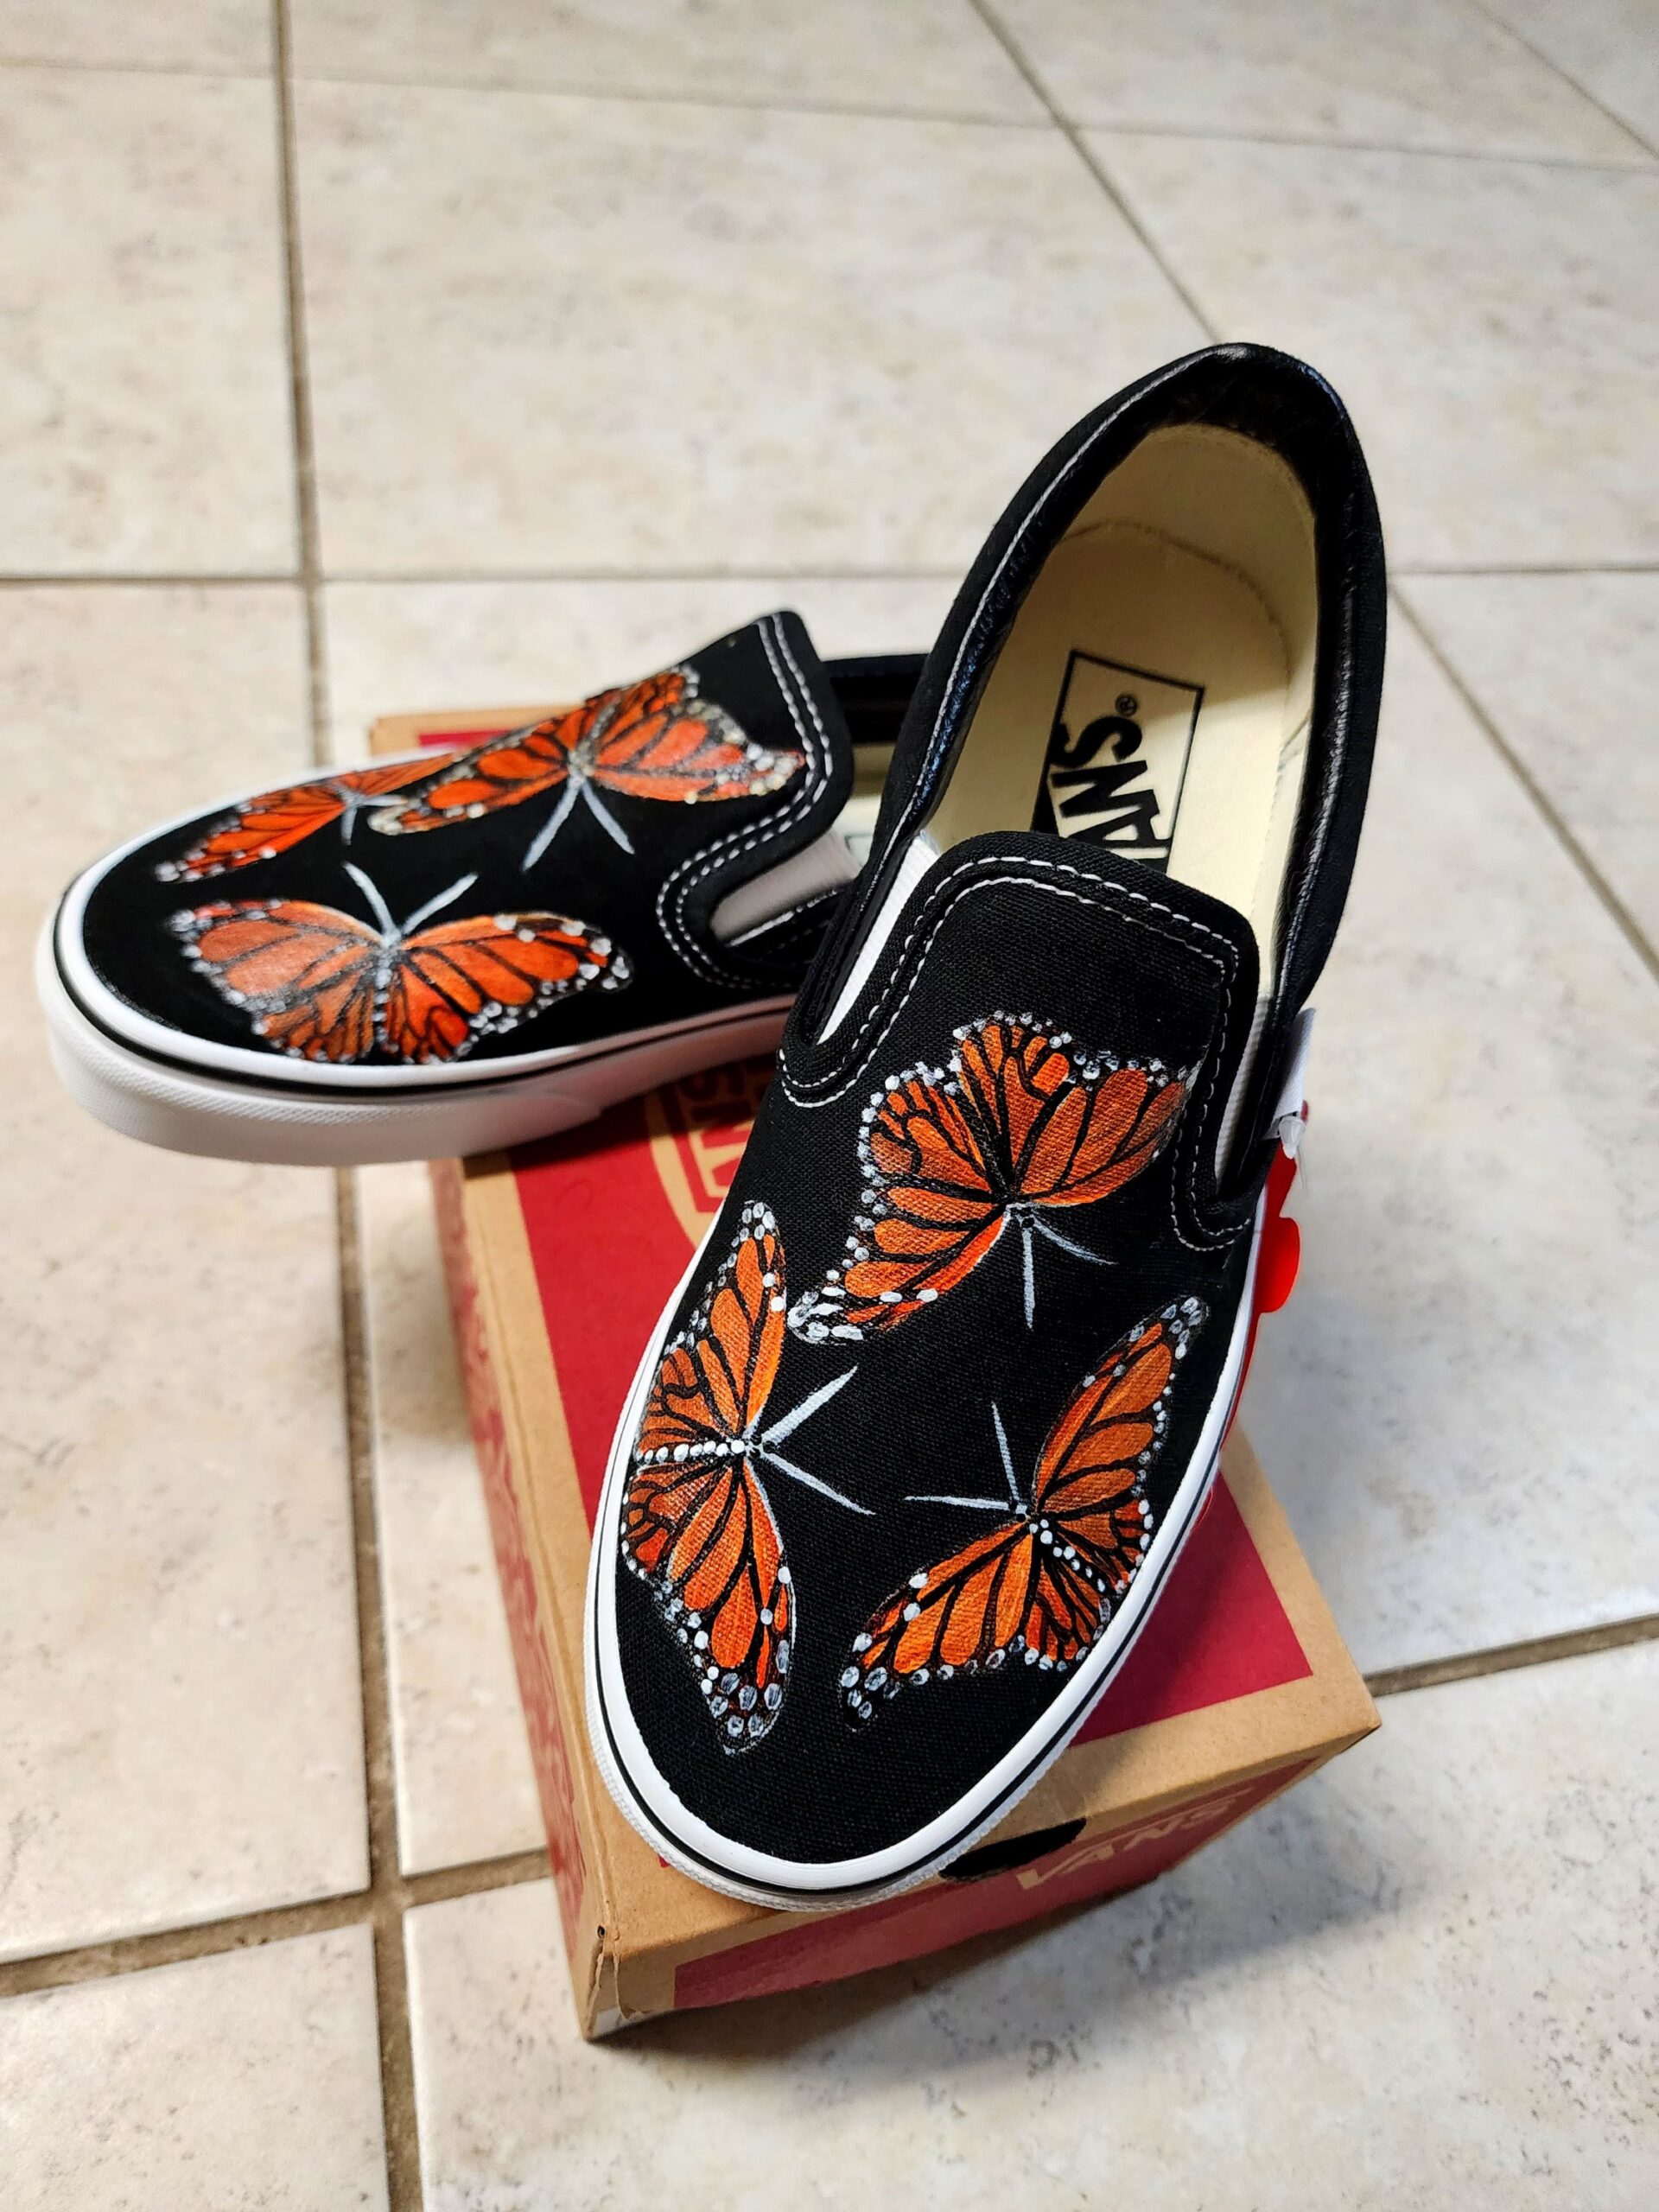 Brand new handpainted vans with a design of monarch butterflies. Textile paint. Washer and dryer safe.
Size: 4.0 US Men | 5.5 US Women.